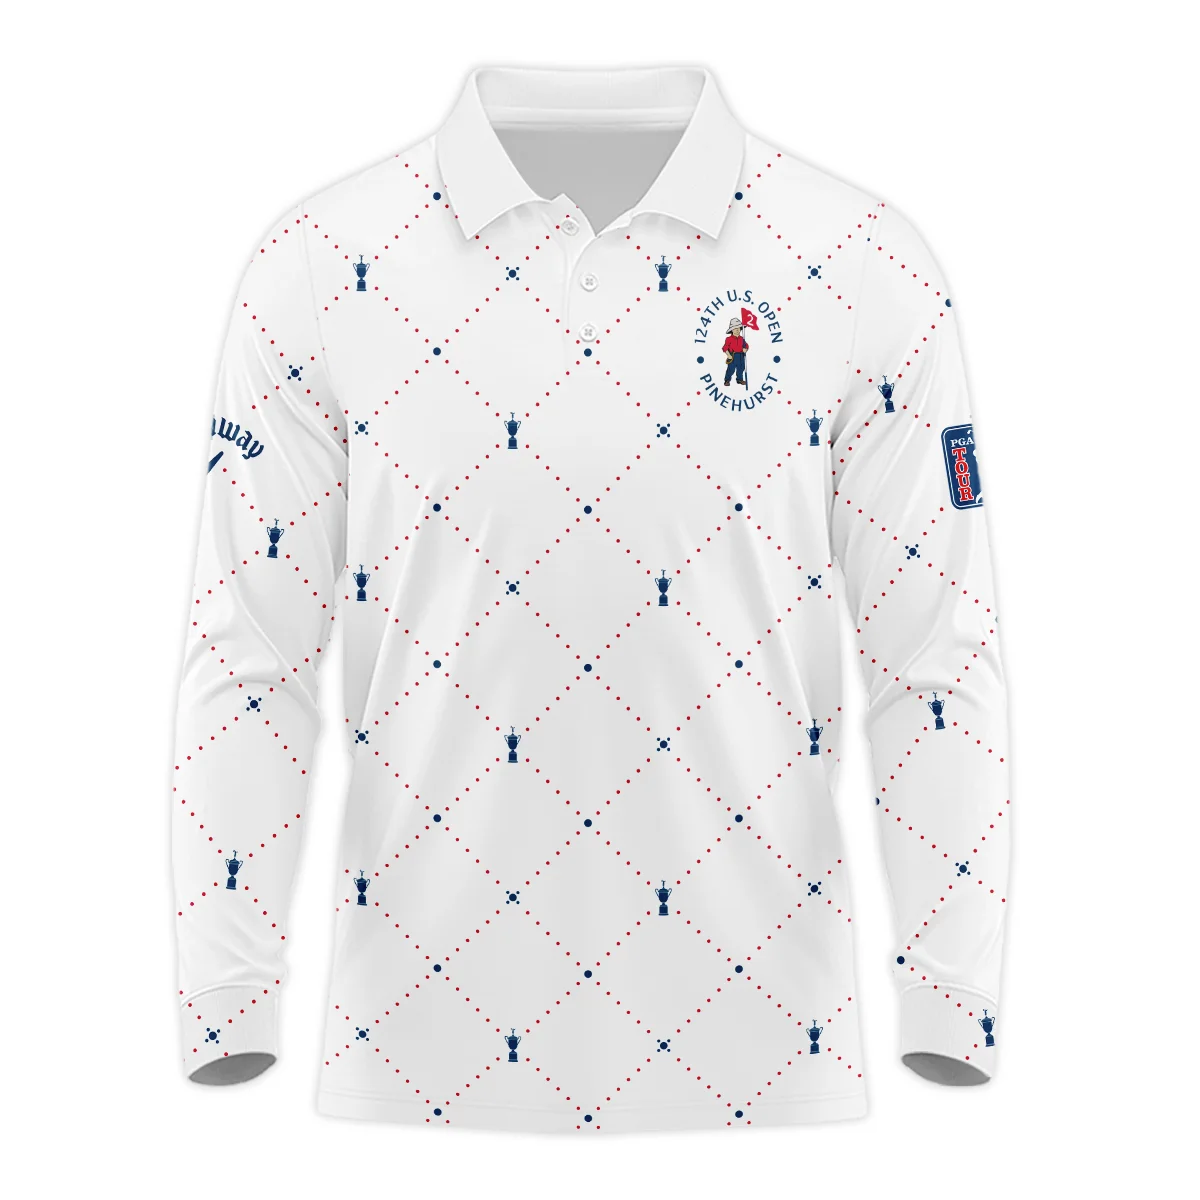 Argyle Pattern With Cup 124th U.S. Open Pinehurst Callaway Long Polo Shirt Style Classic Long Polo Shirt For Men